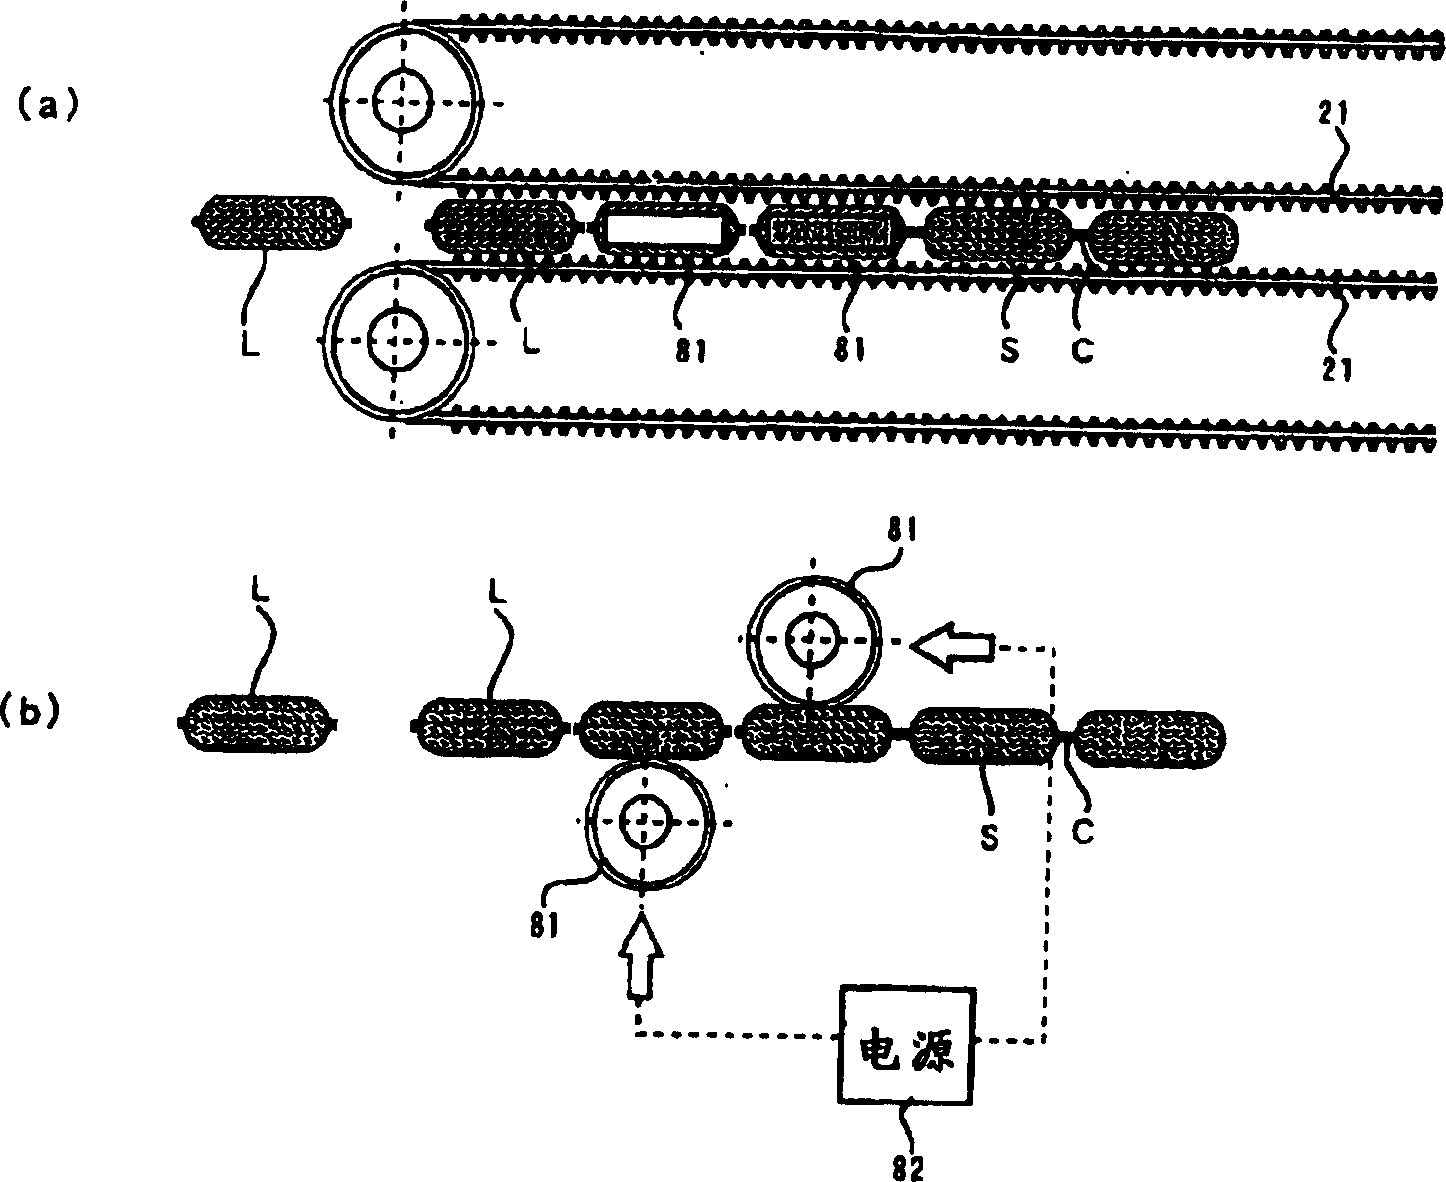 Apparatus for molten cutting off connecting portions of serial sausages